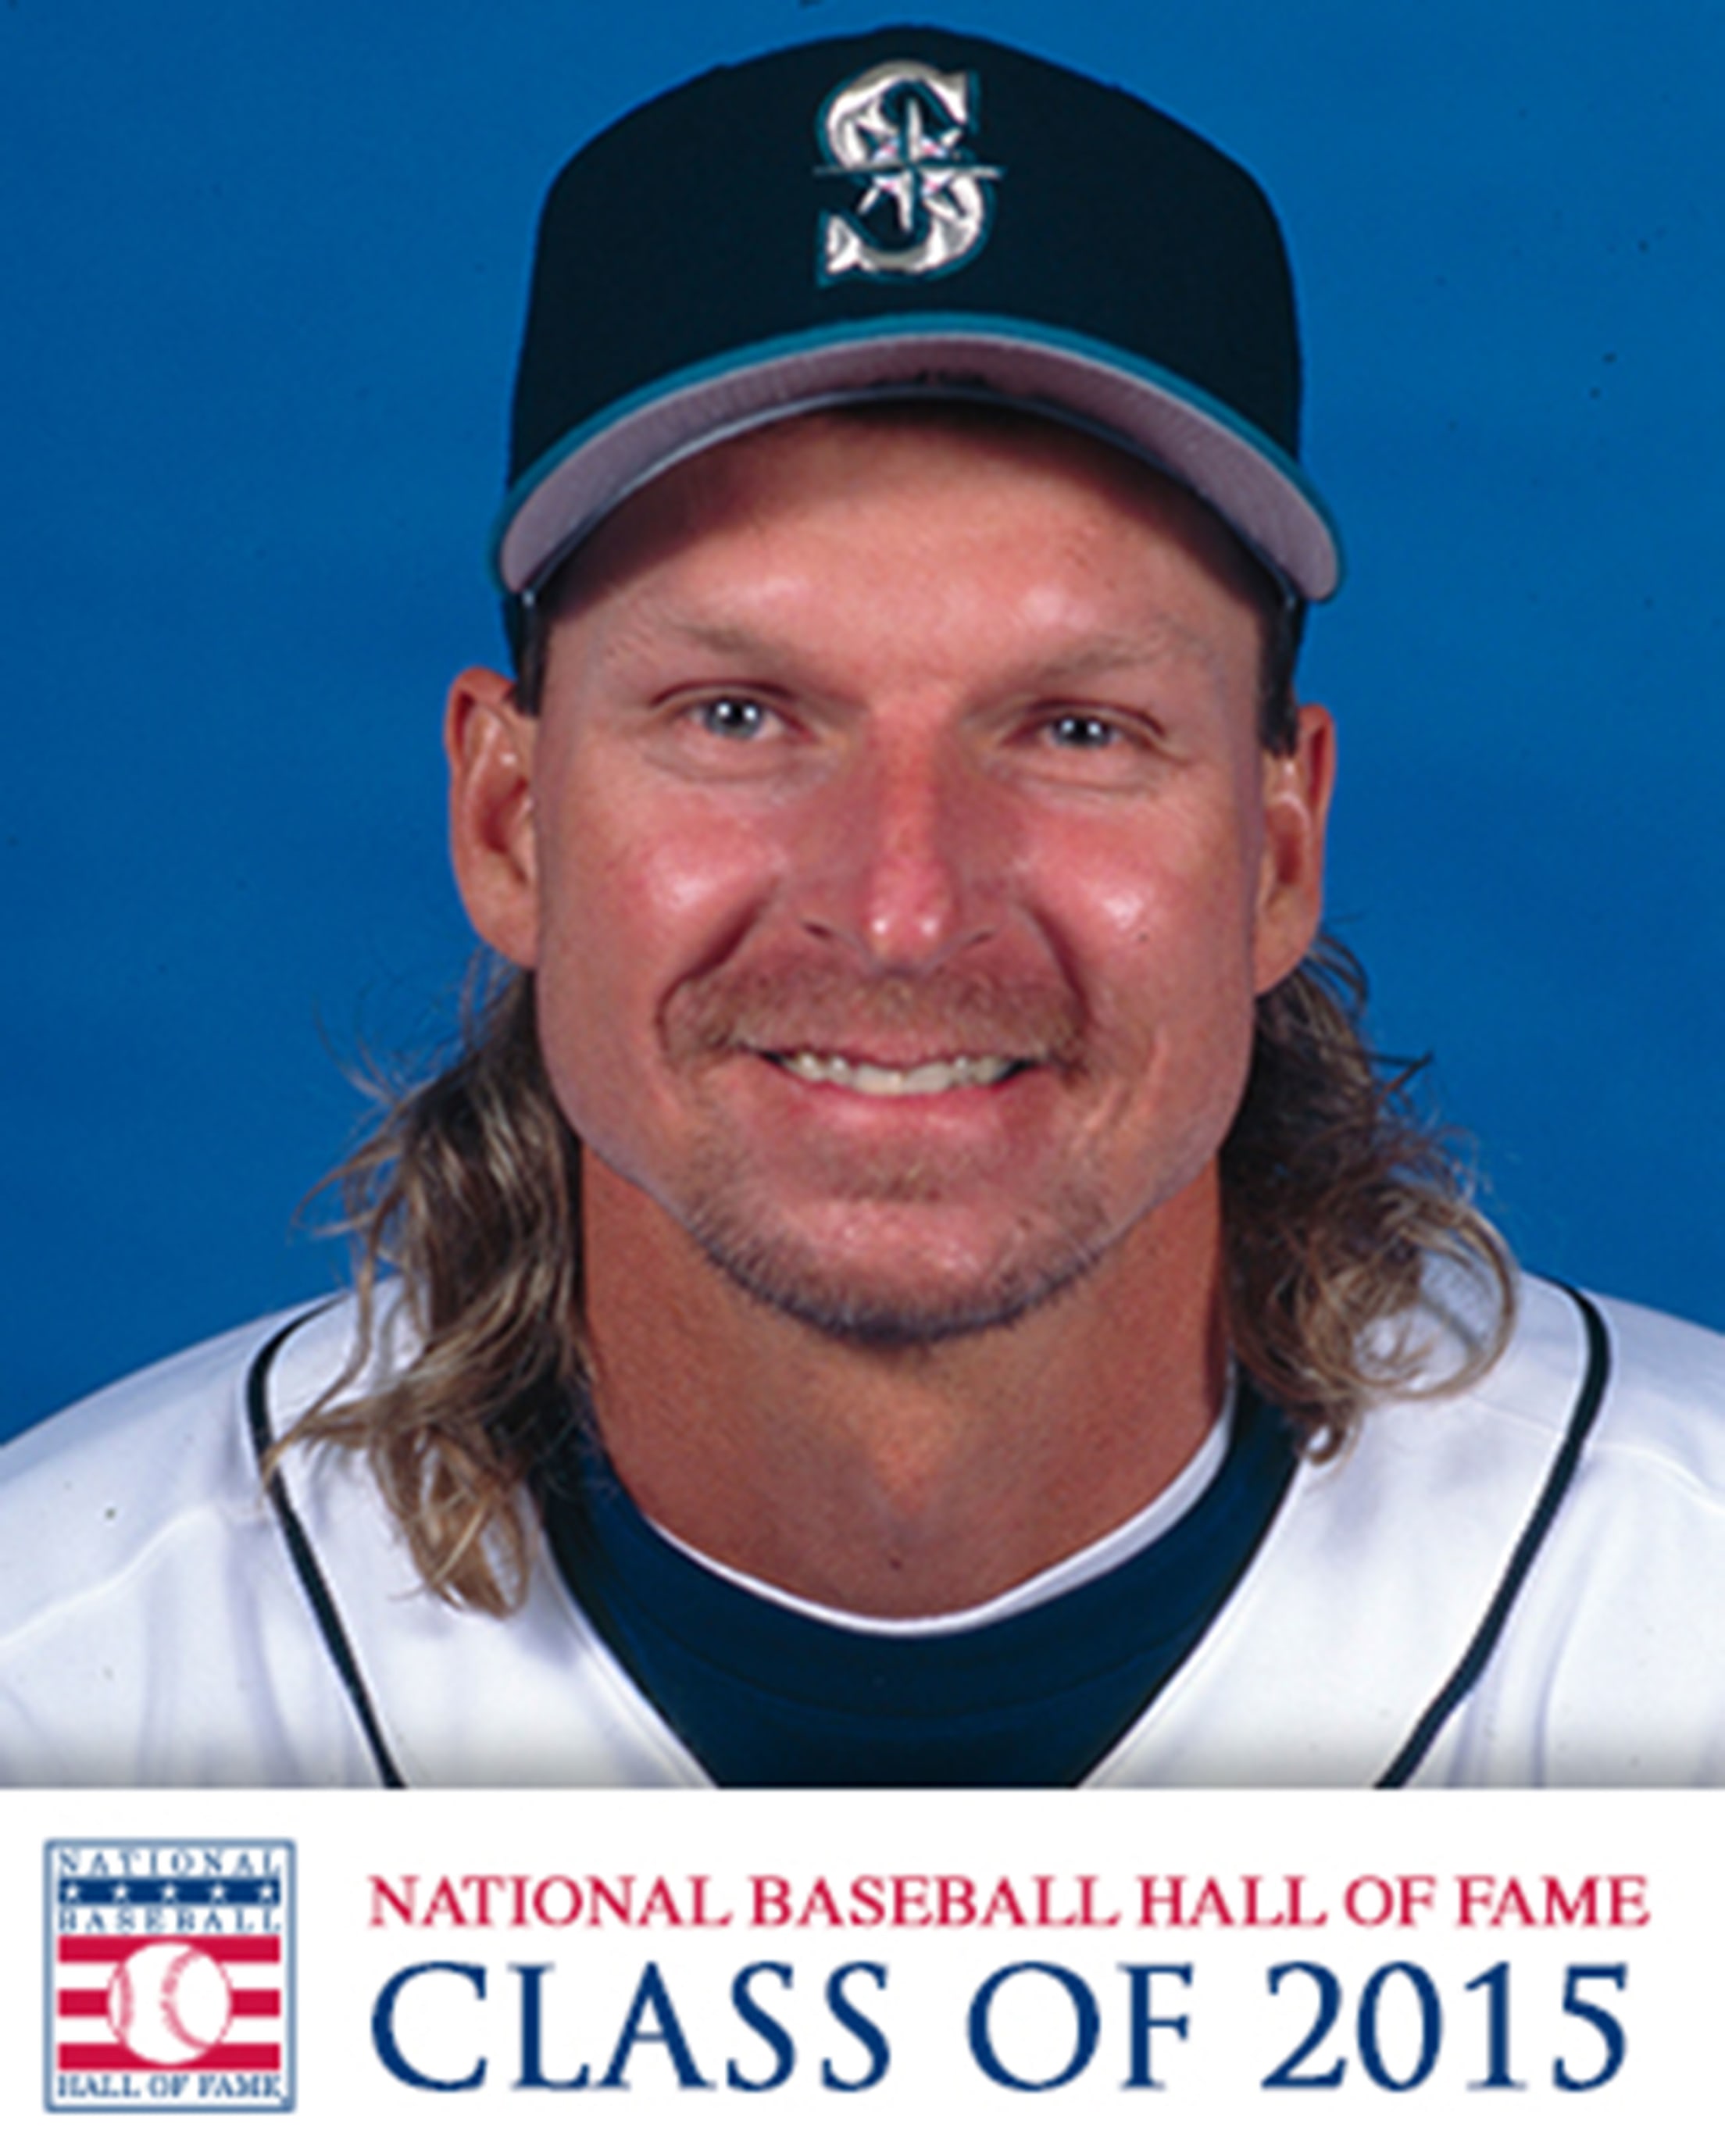 On This Date: Mariners Acquire Randy Johnson, by Mariners PR